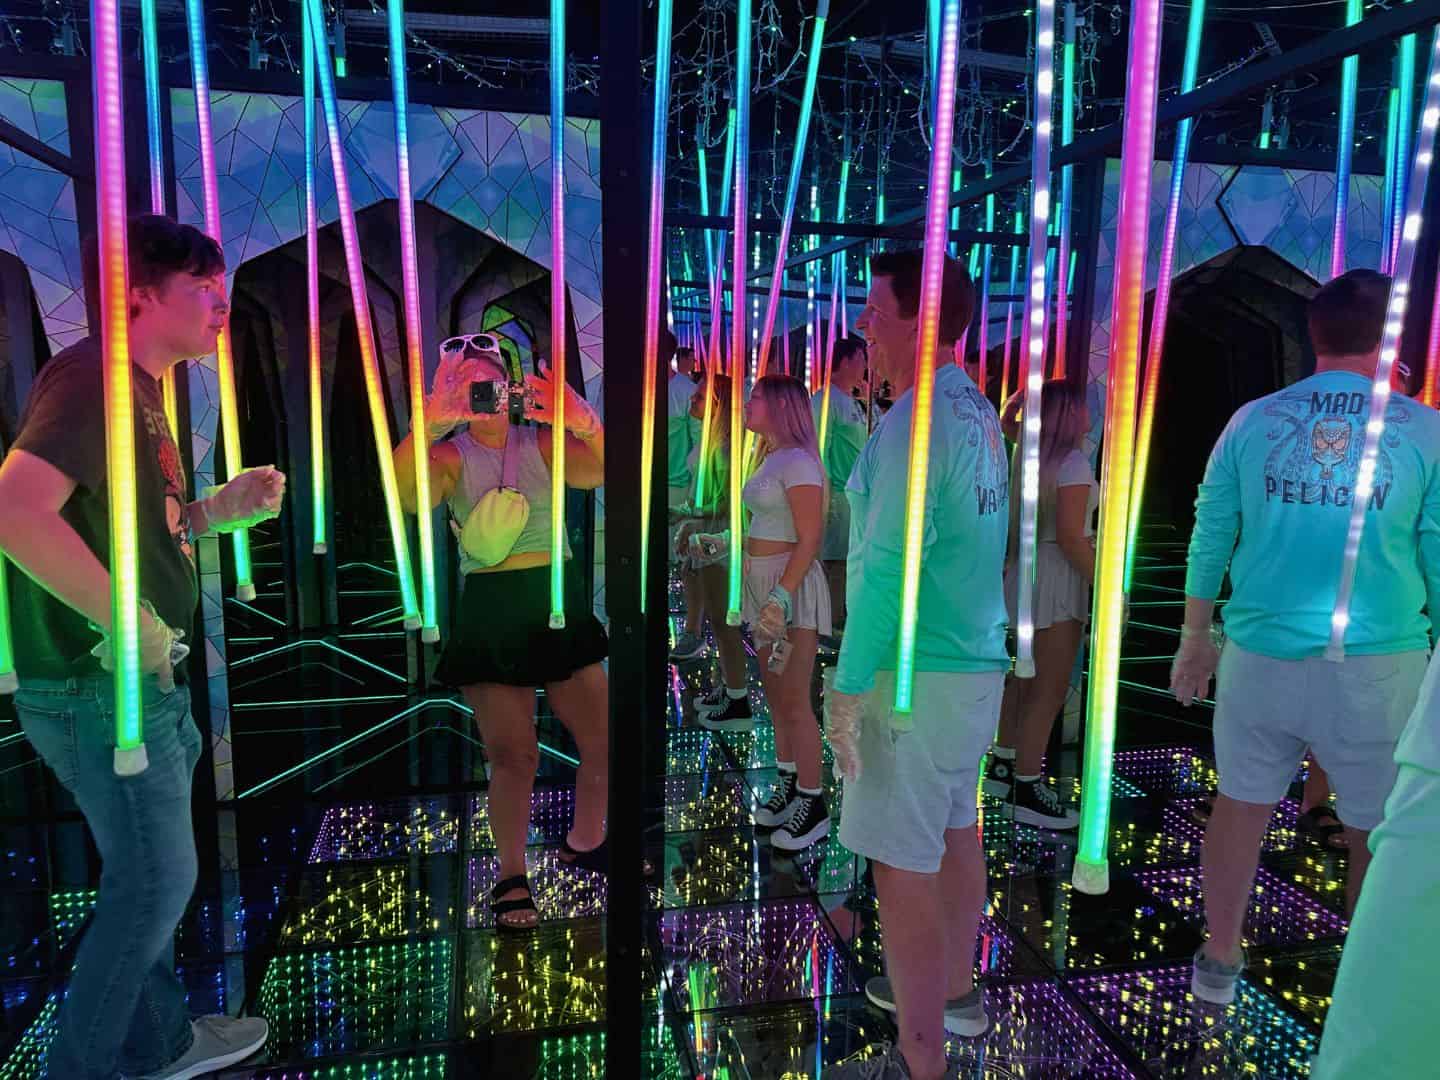 Image of 4 people inside the Mirror Maze at Ripleys Believe It or Not Orlando